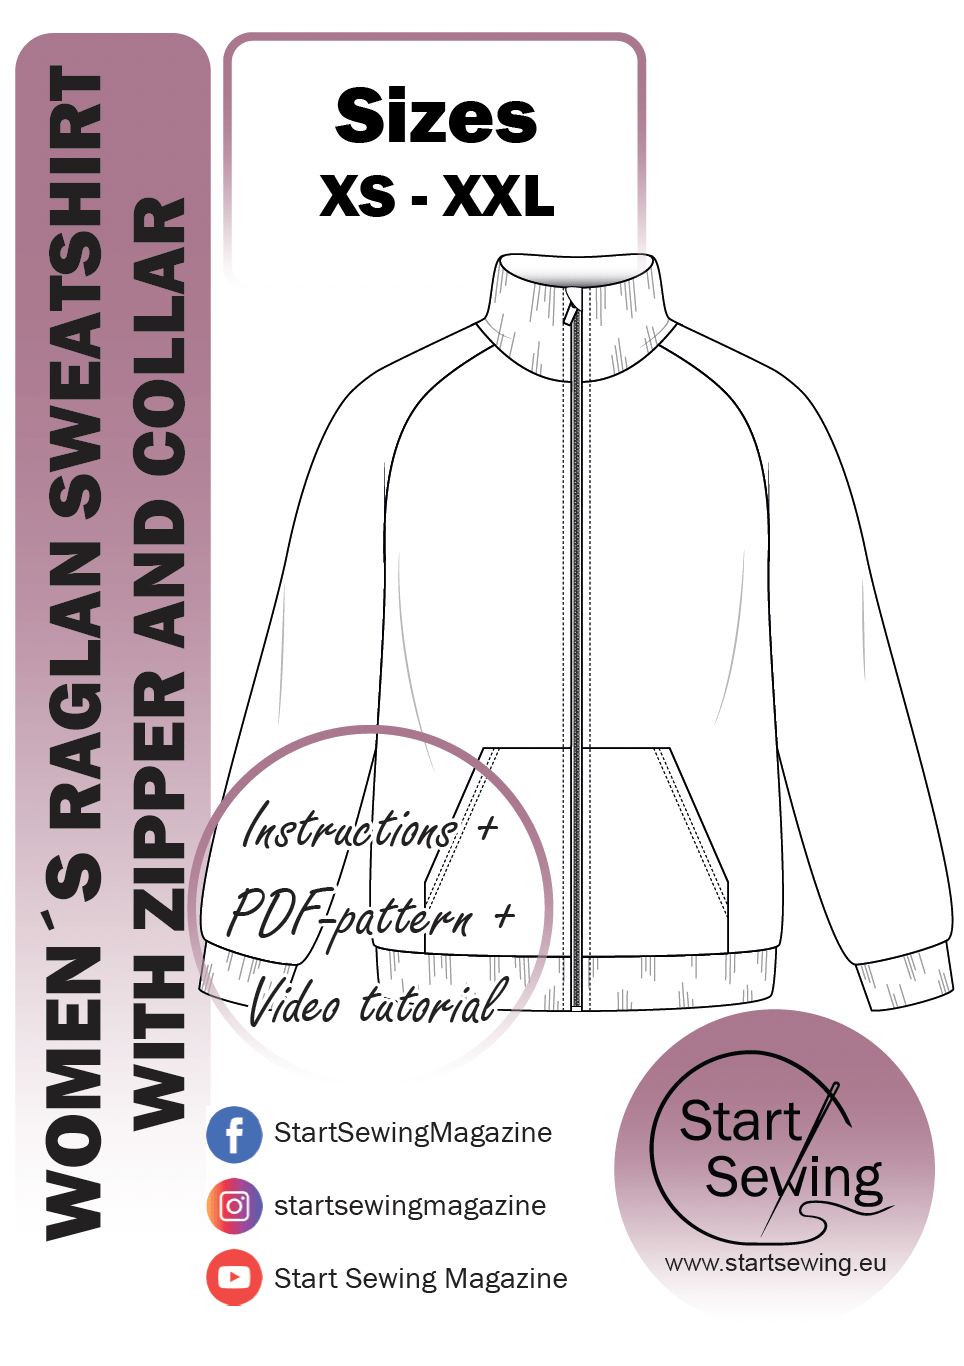 Women's sweatshirt with a collar and zipper PDF sewing pattern. This pattern includes sizes XS-XXL.